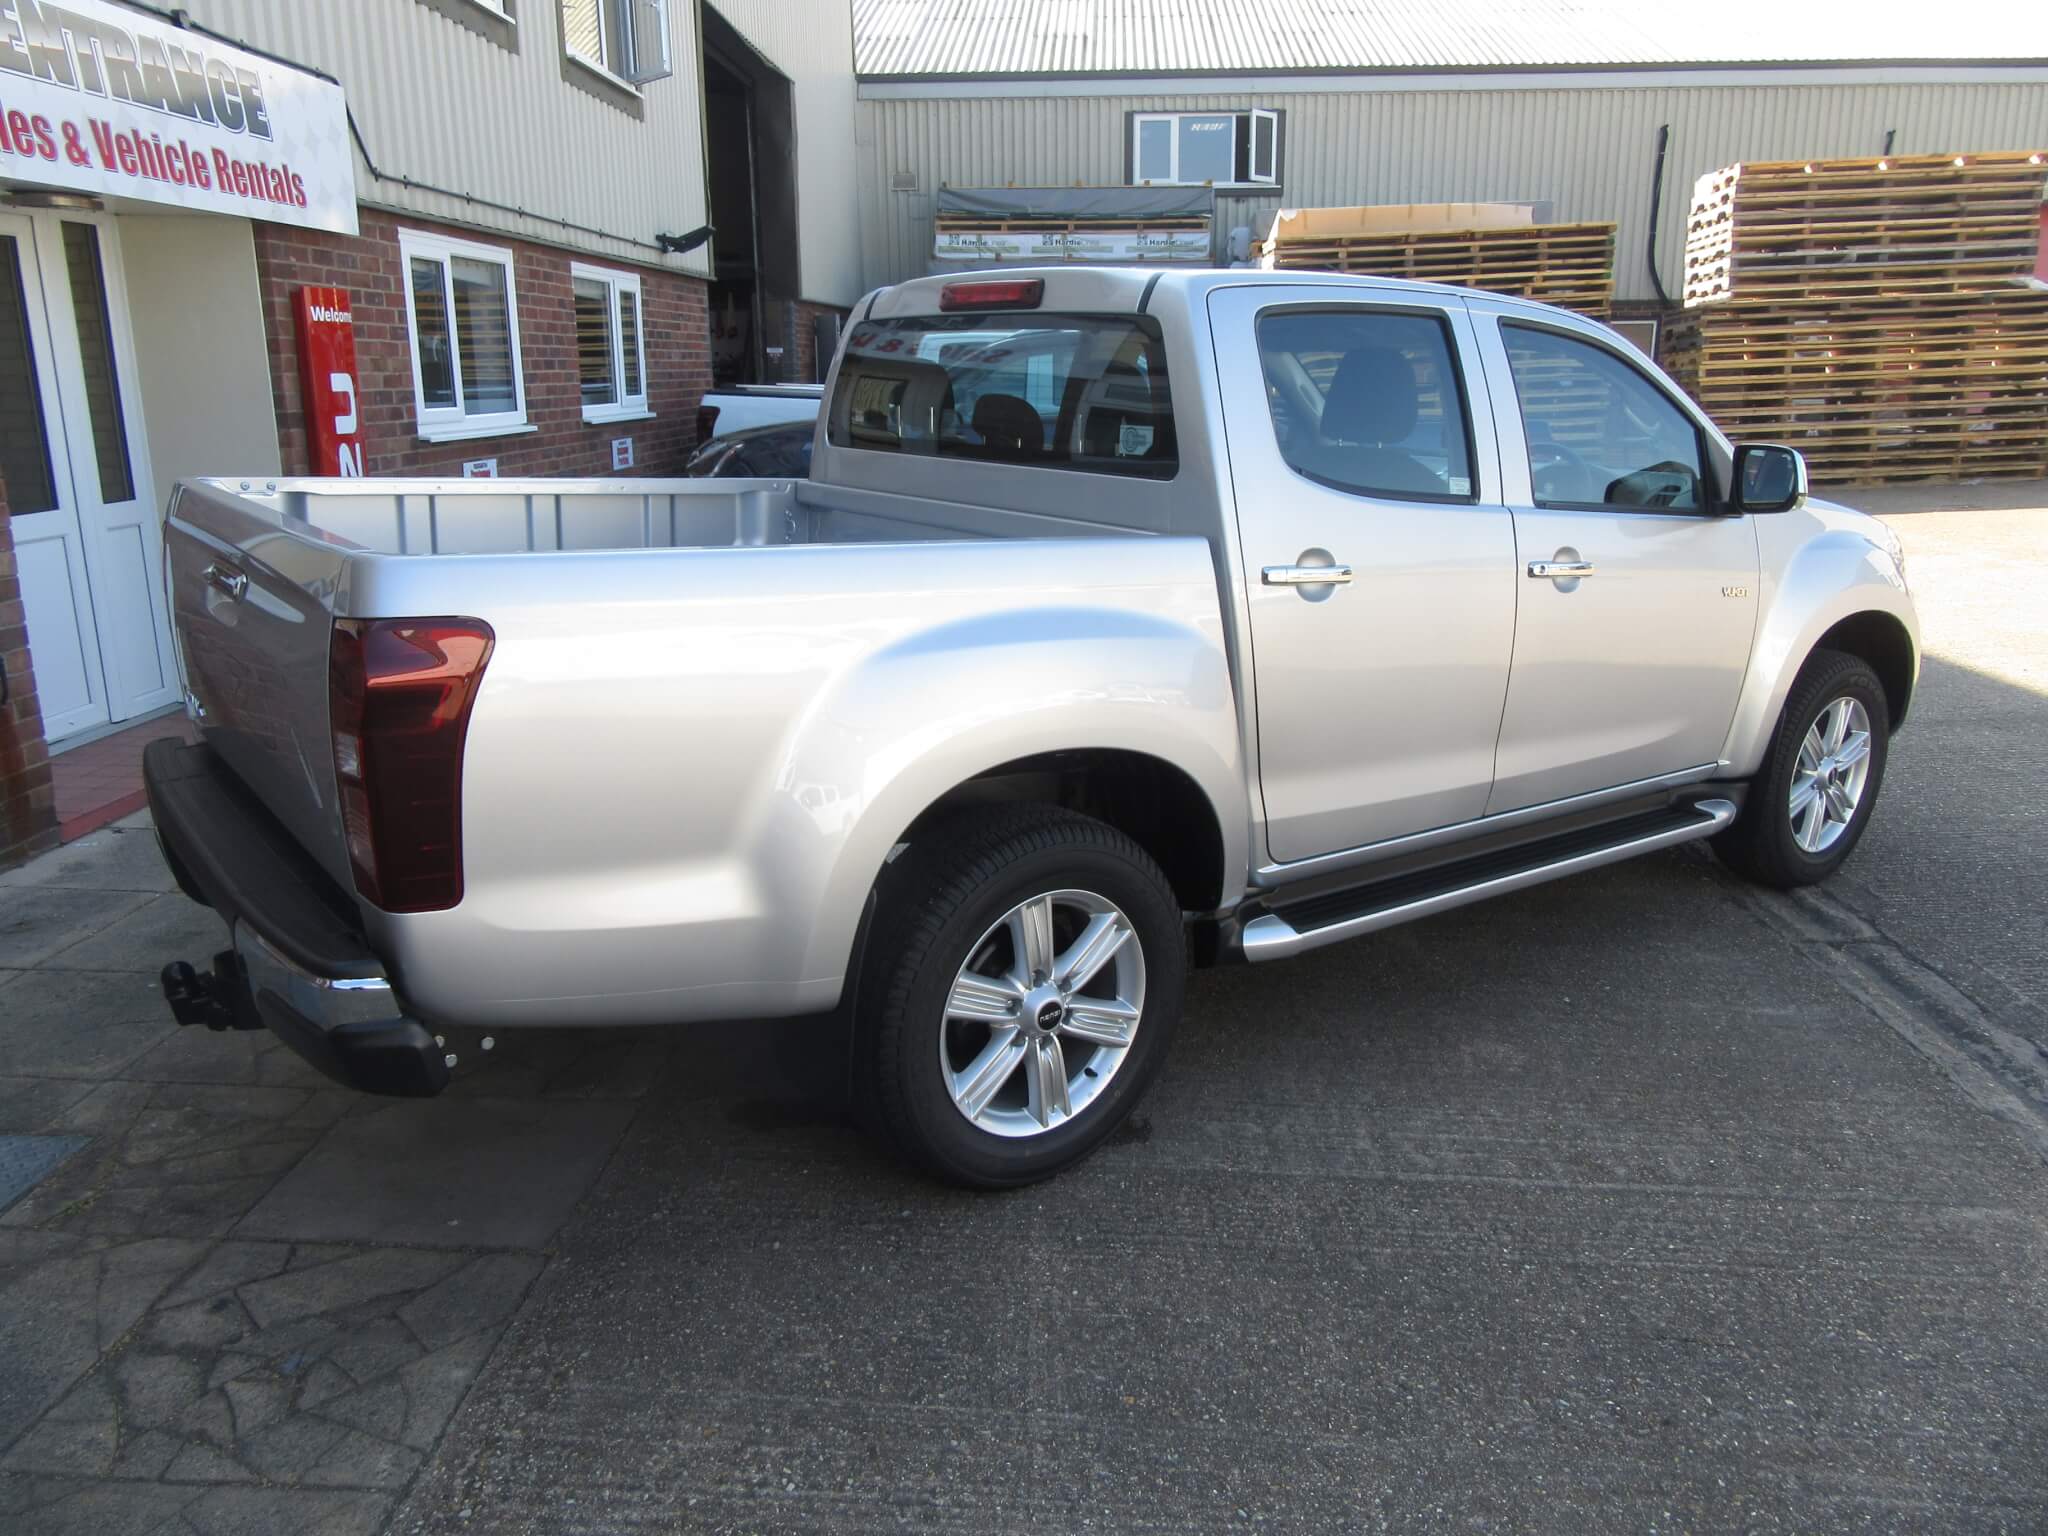 Now Available To Order From Manchetts Isuzu, The ISUZU D ...